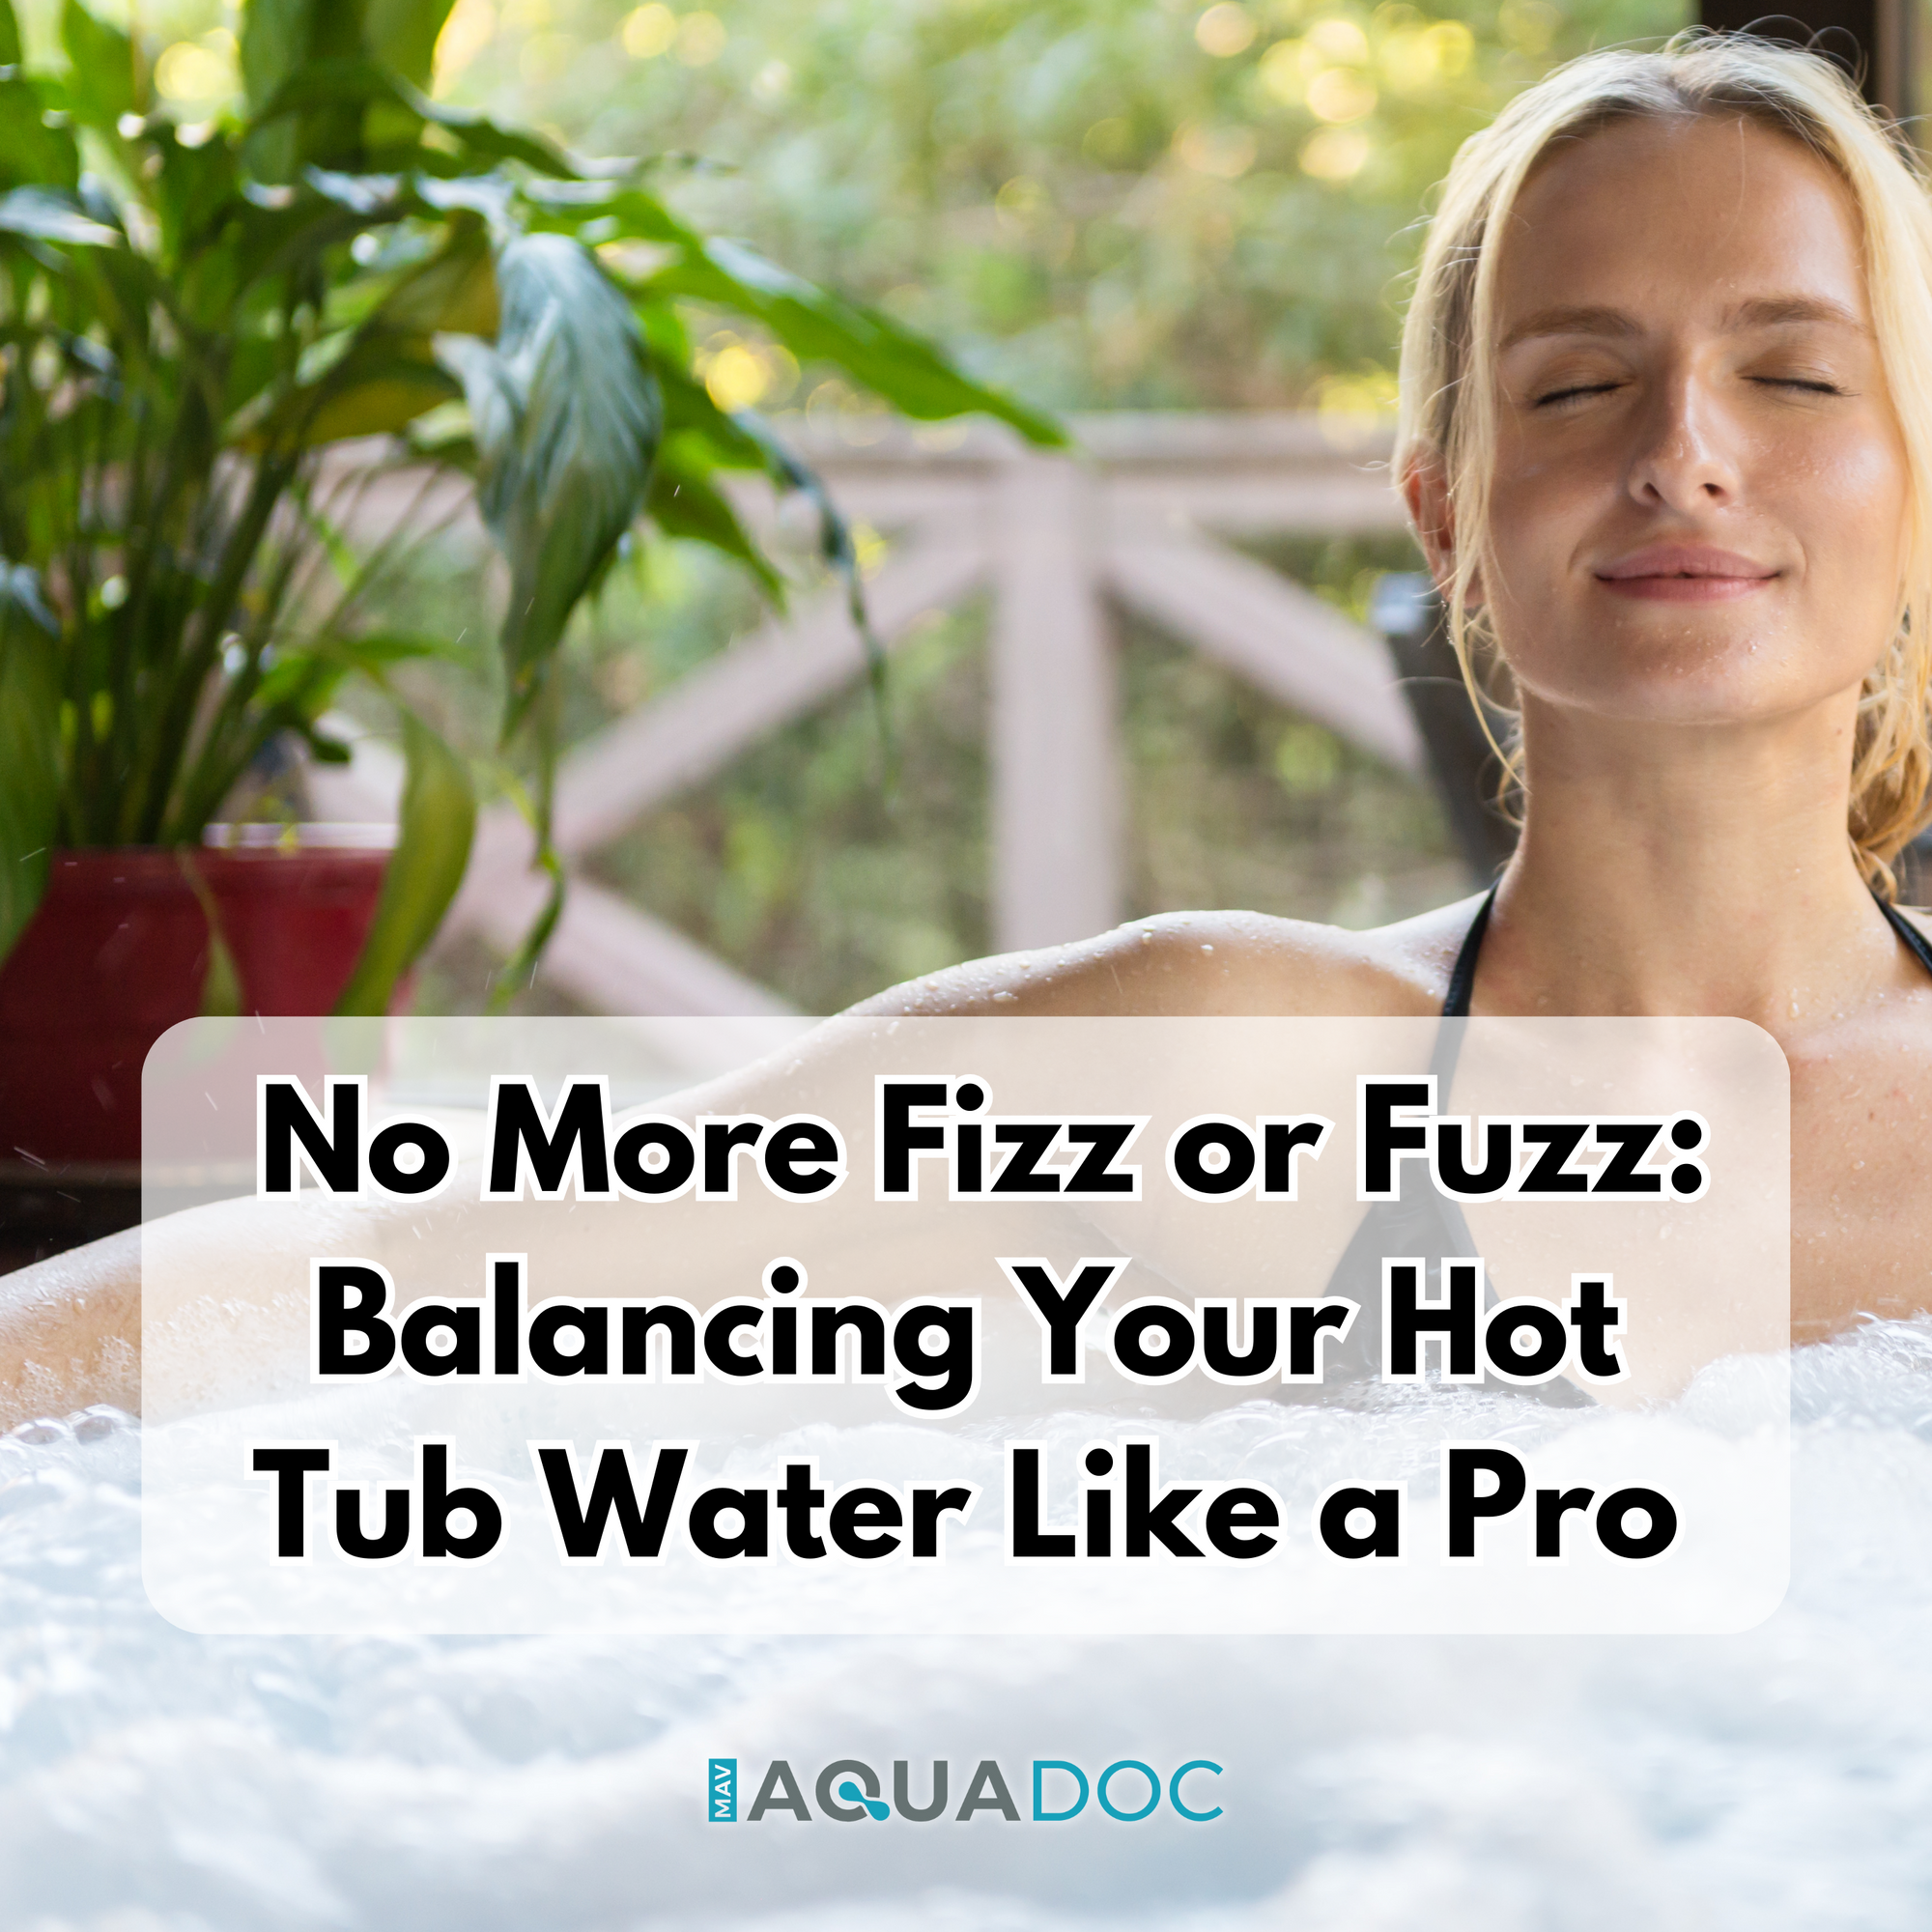 No More Fizz or Fuzz: Balancing Your Hot Tub Water Like a Pro